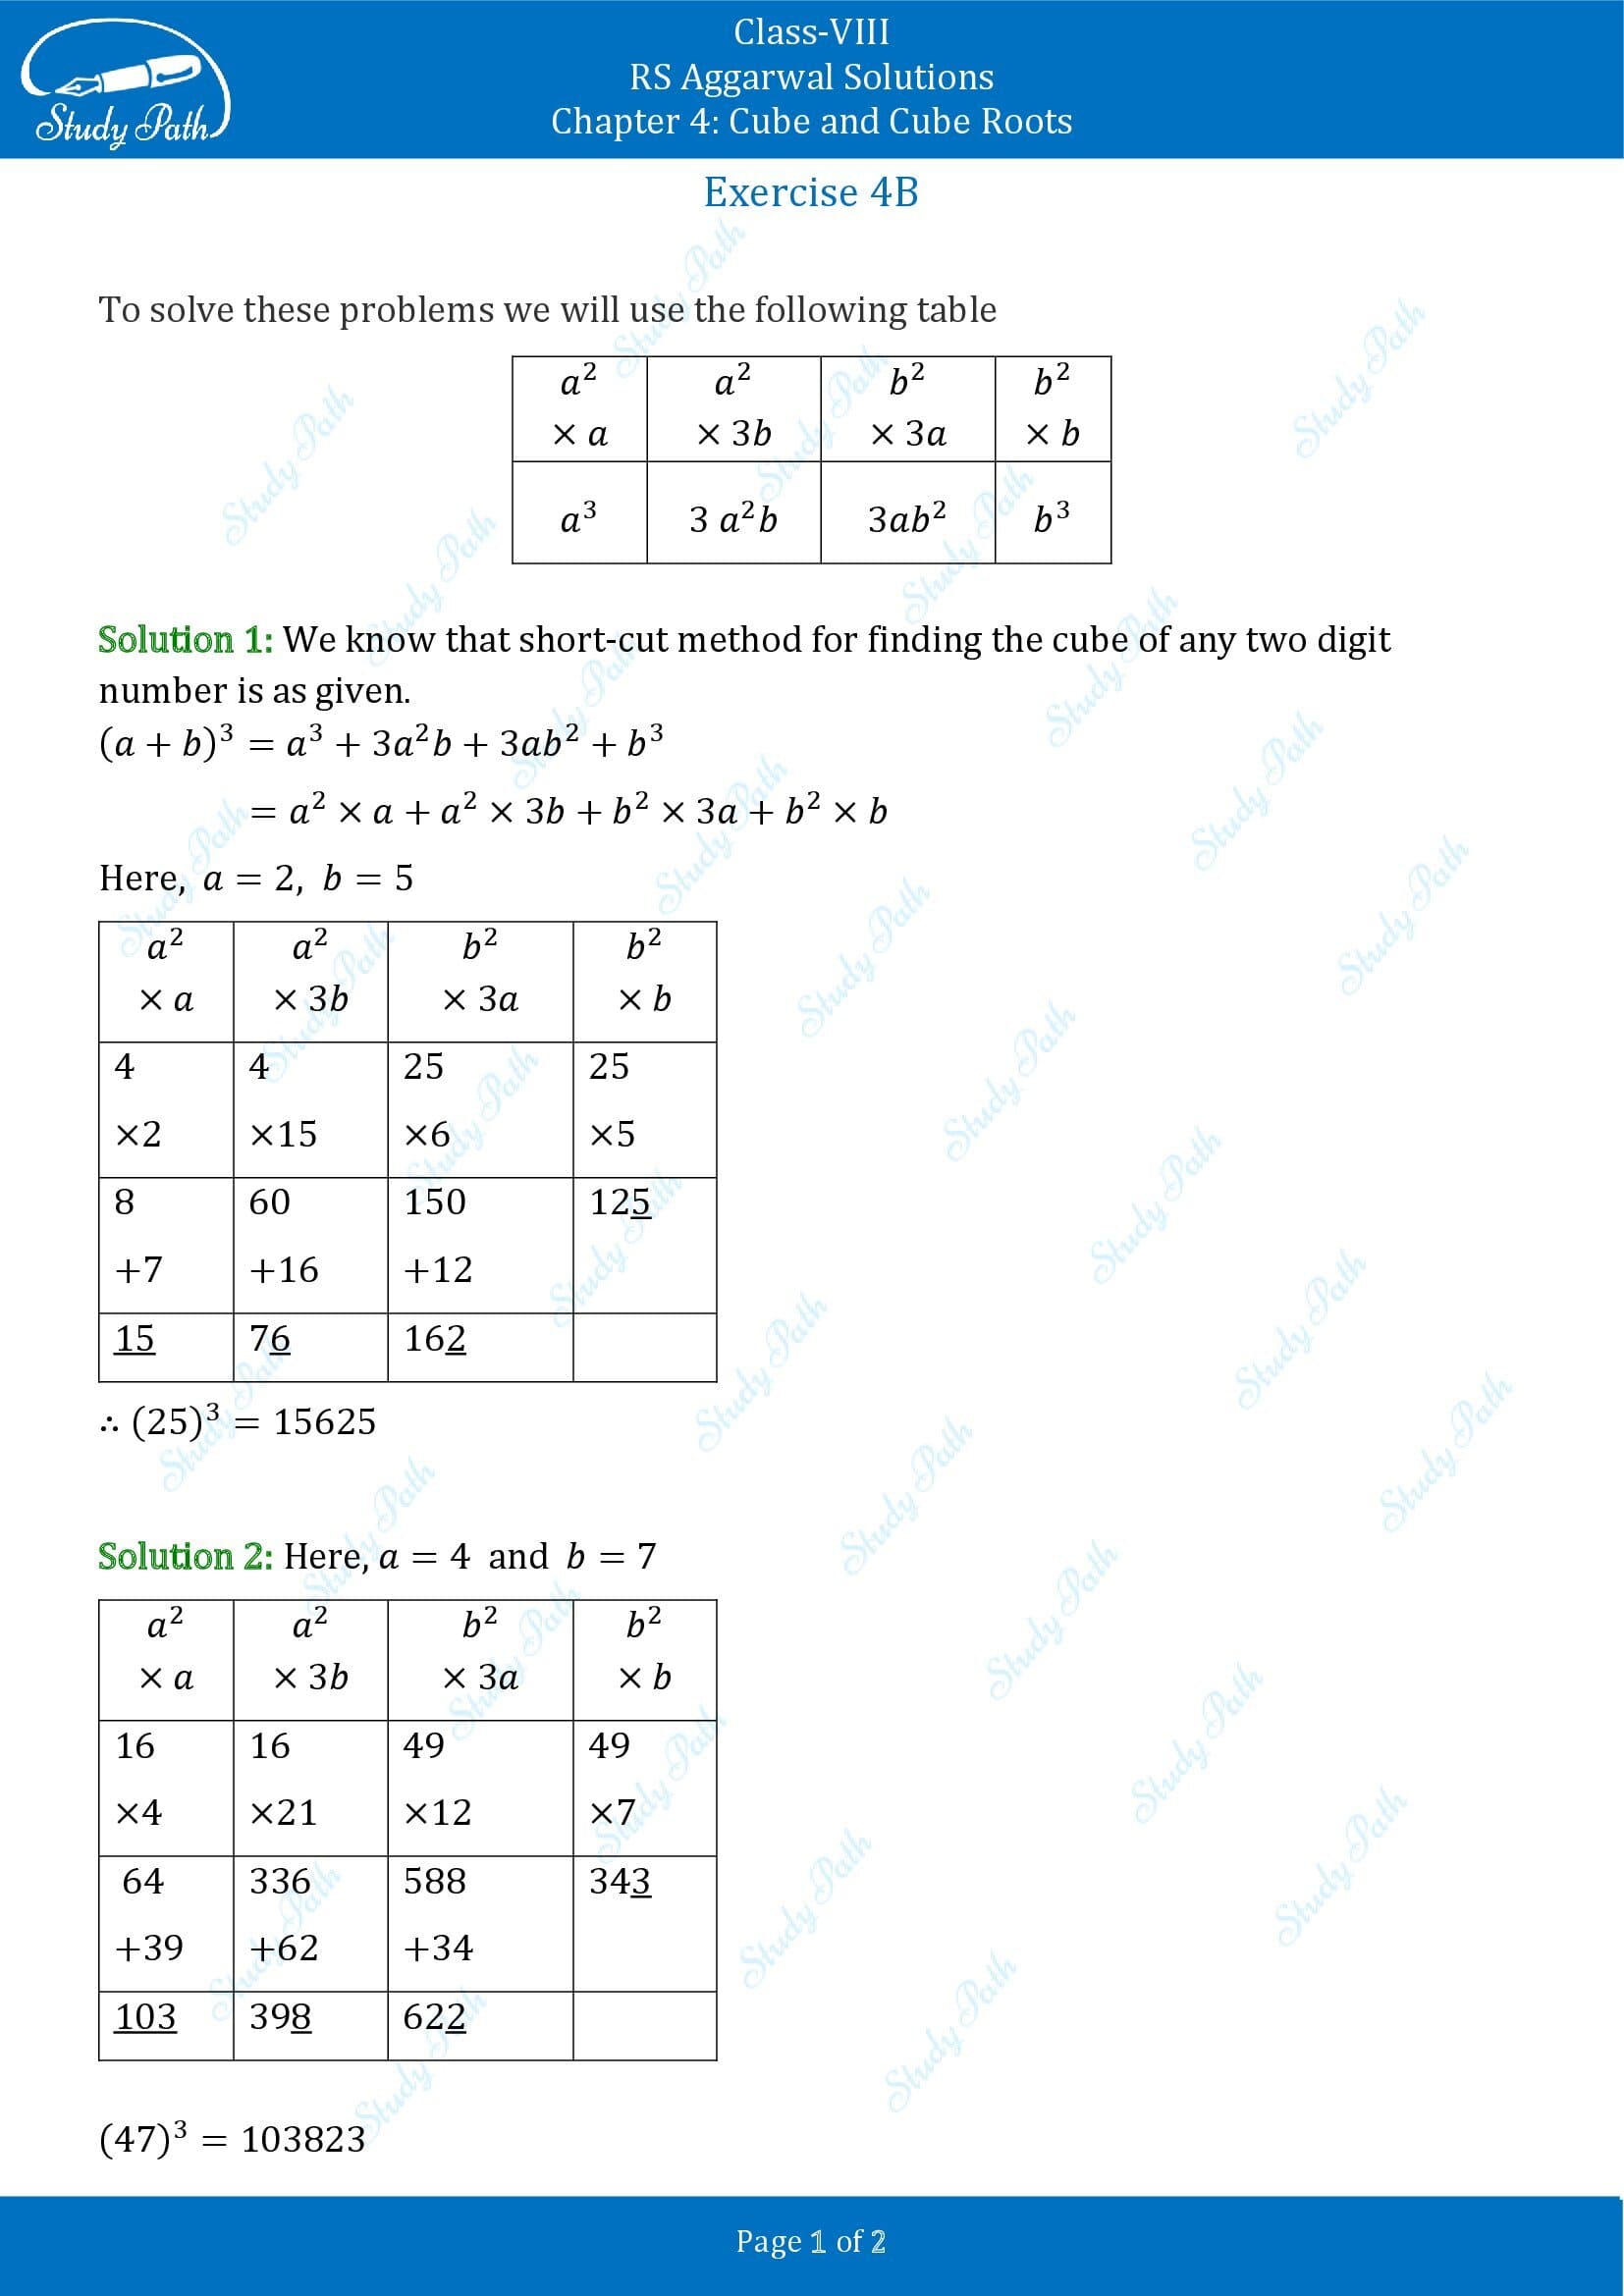 RS Aggarwal Solutions Class 8 Chapter 4 Cube and Cube Roots Exercise 4B 00001